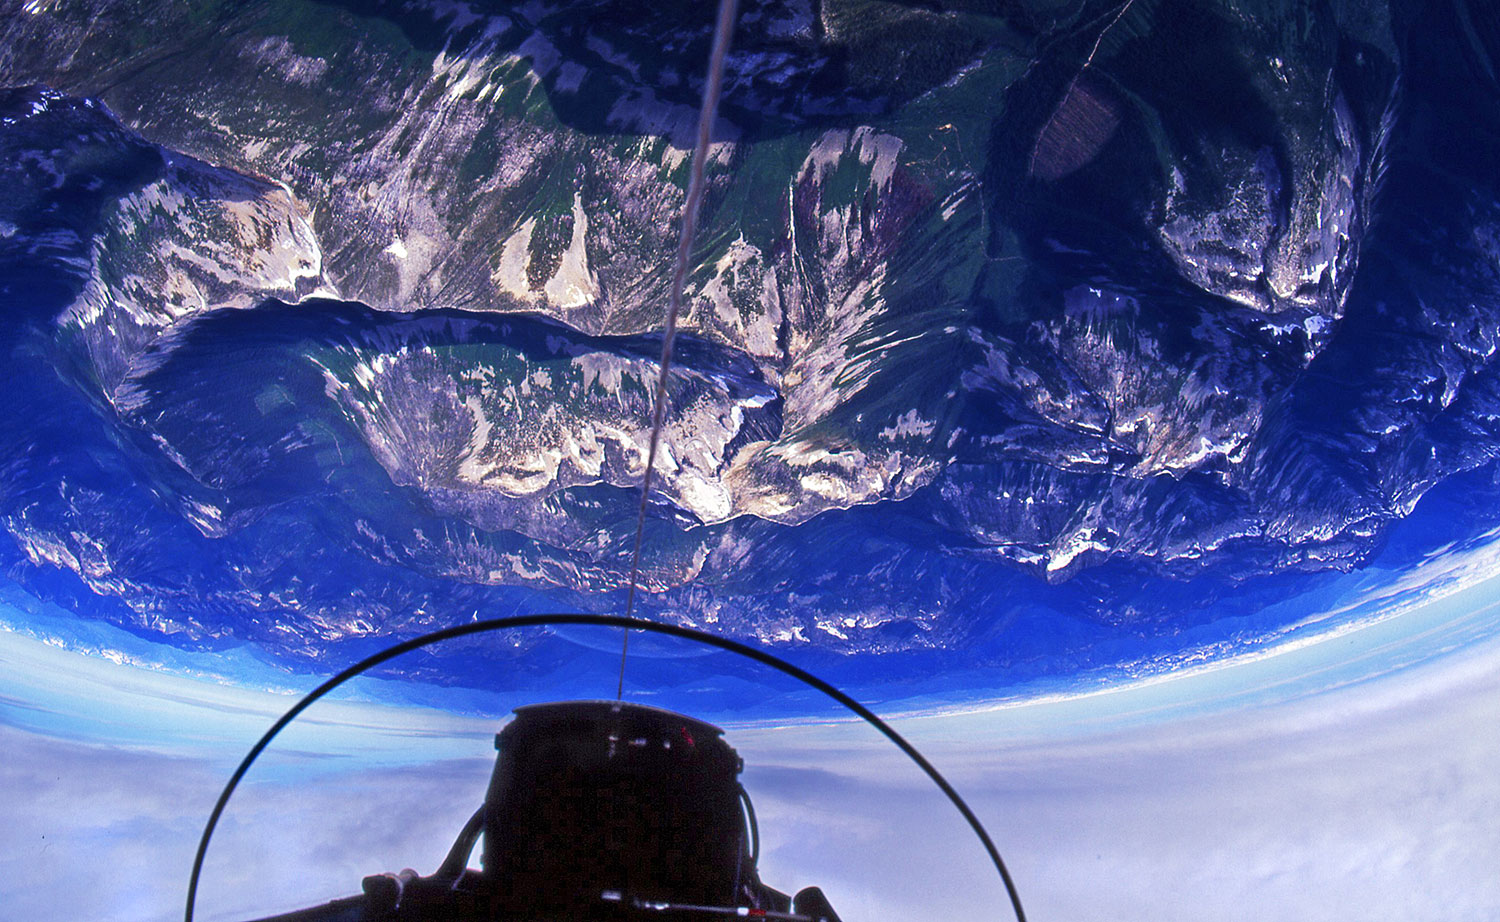 Inverted flight over the Rockies in a Lockheed T-33 jet fighter